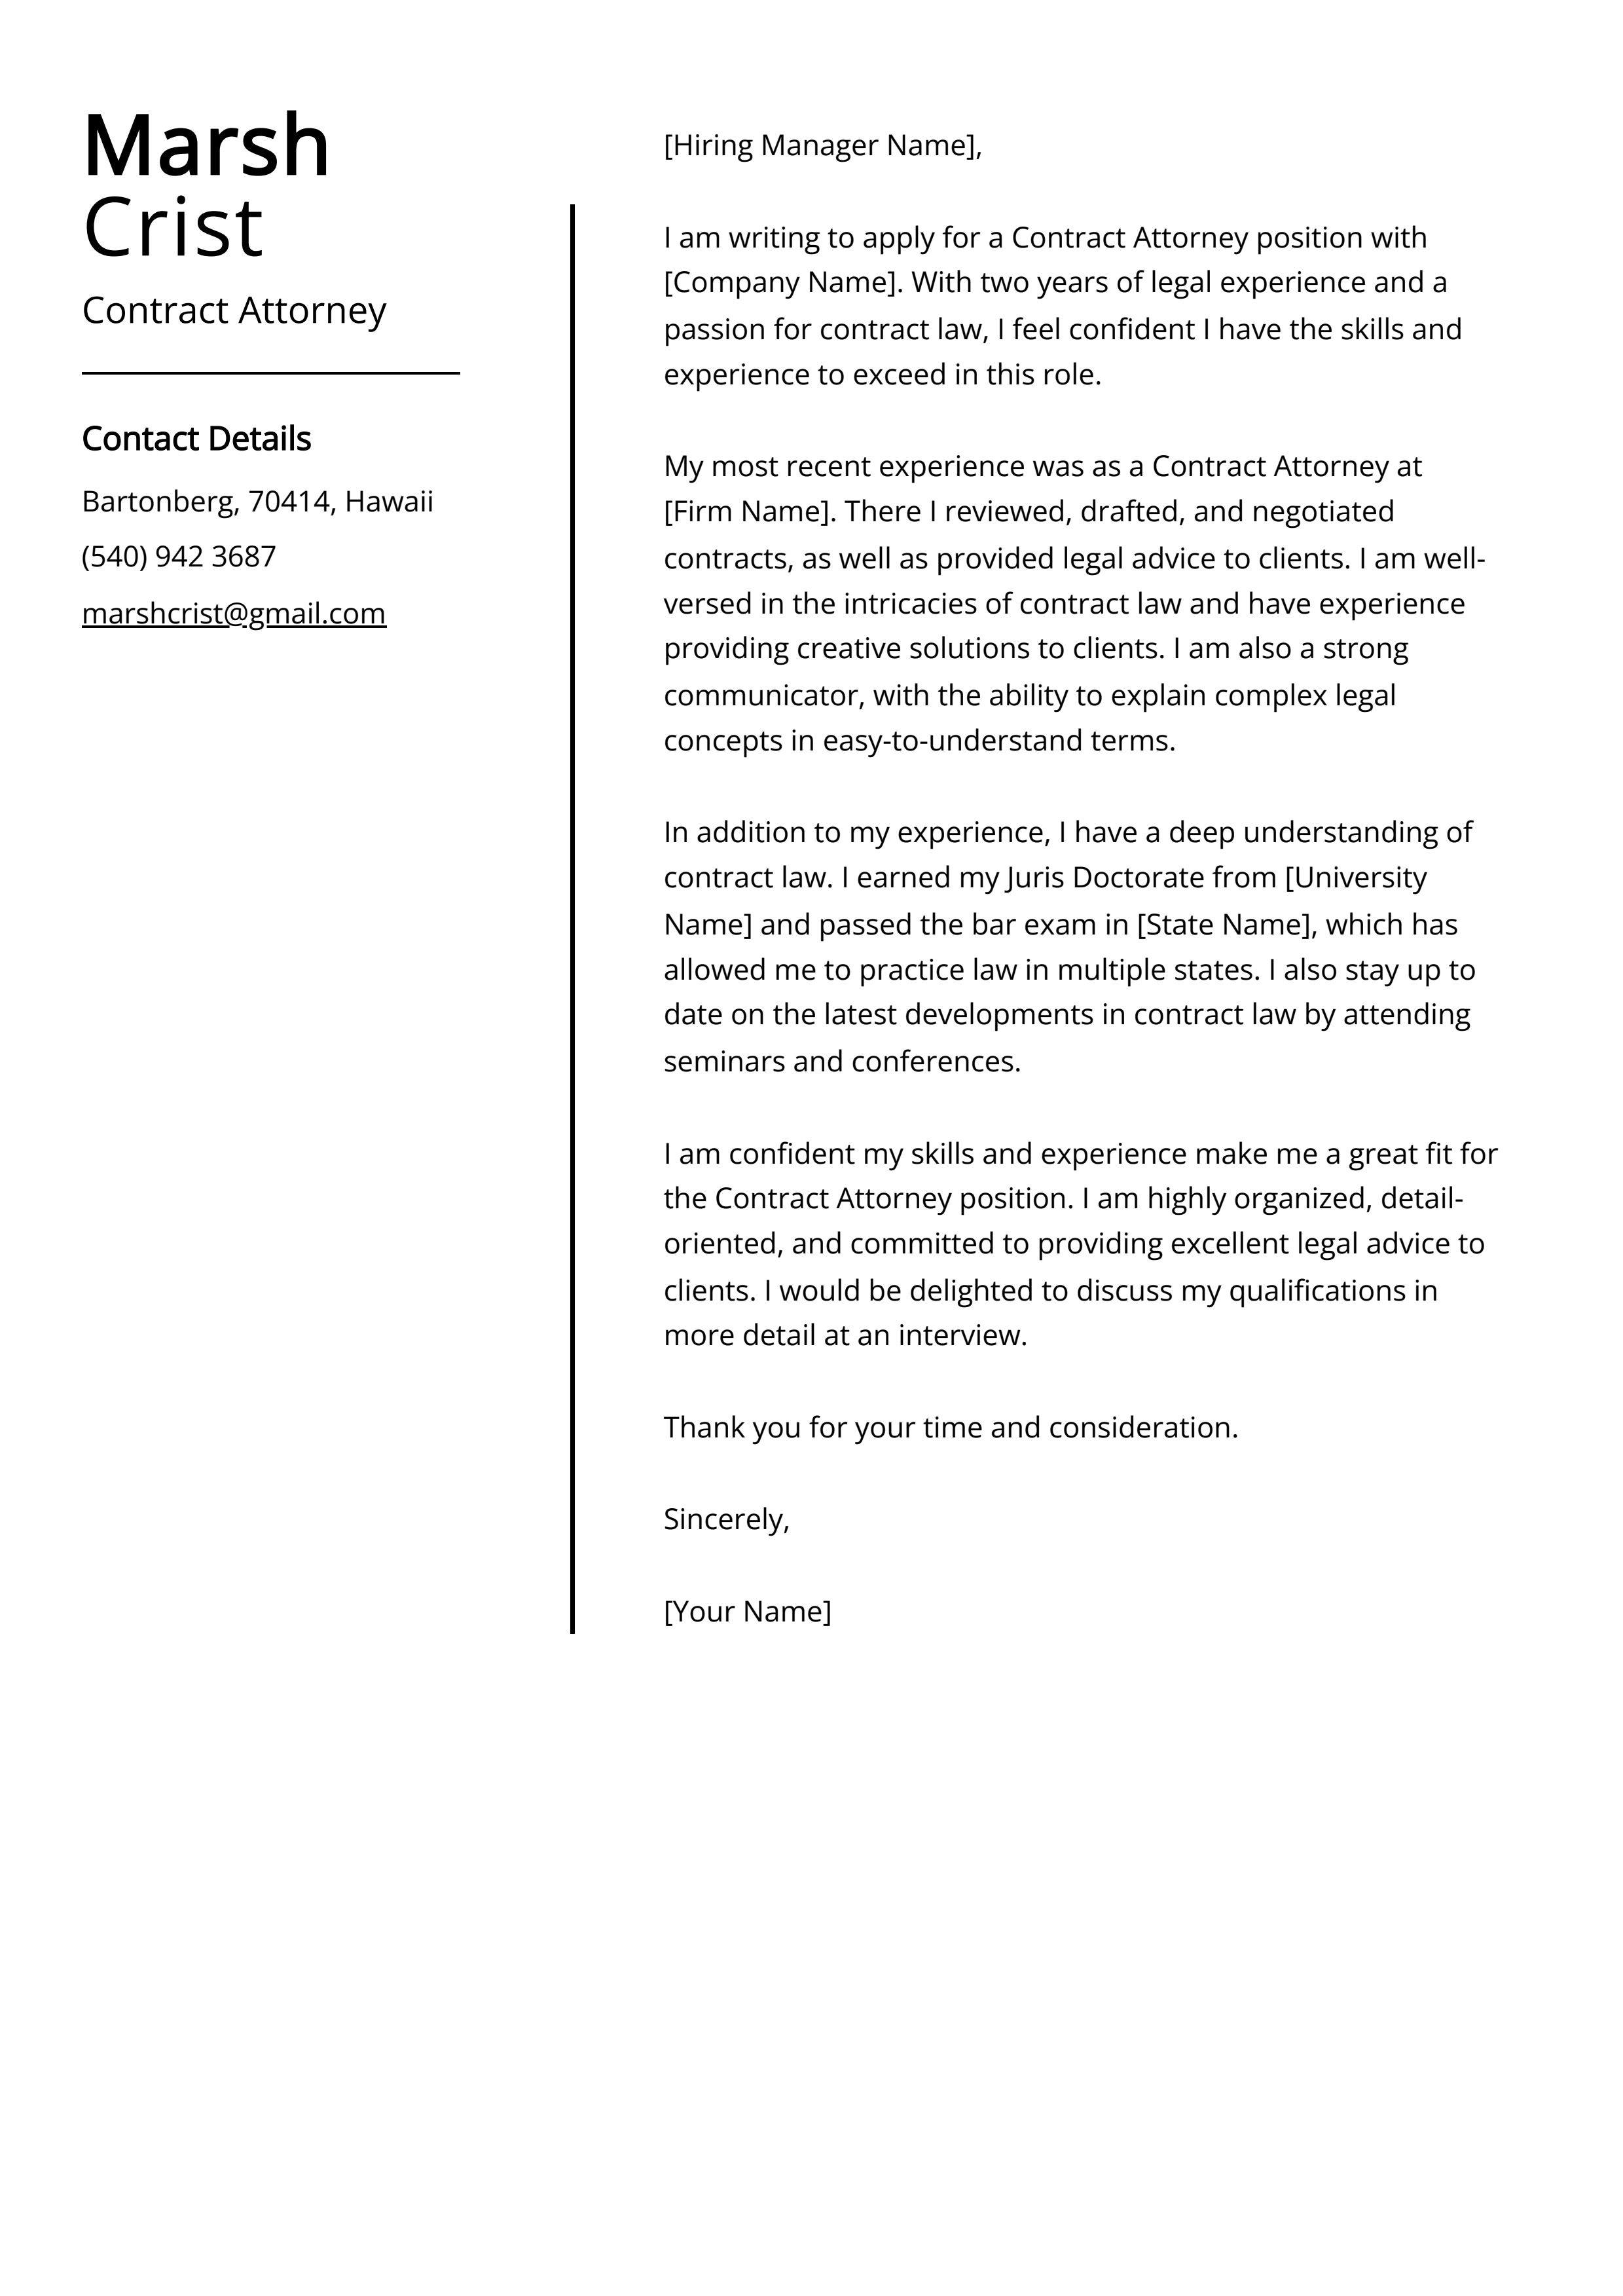 Contract Attorney Cover Letter Example